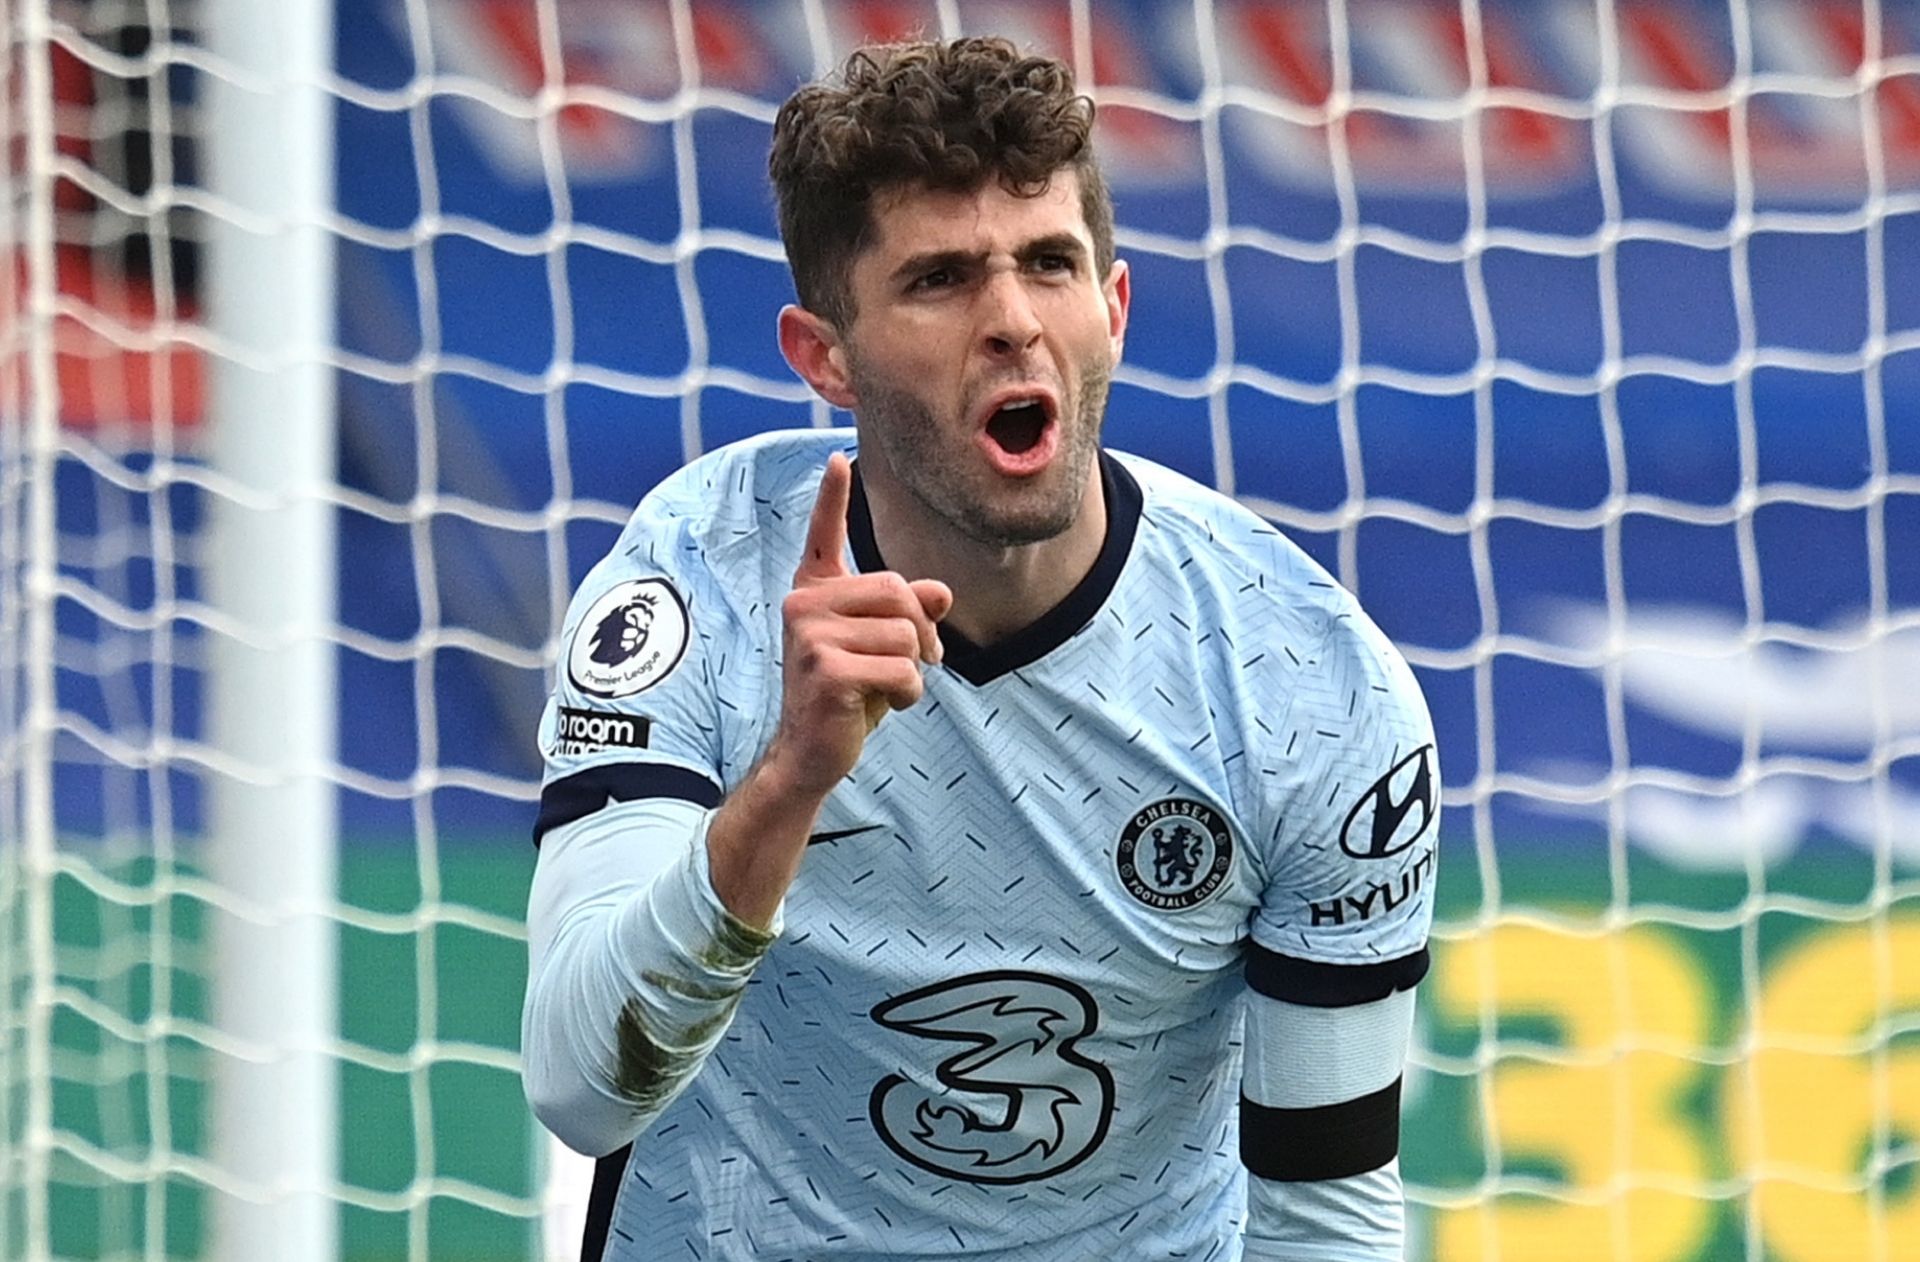 'That’s the aim for me' - Pulisic reveals Chelsea goal for new season